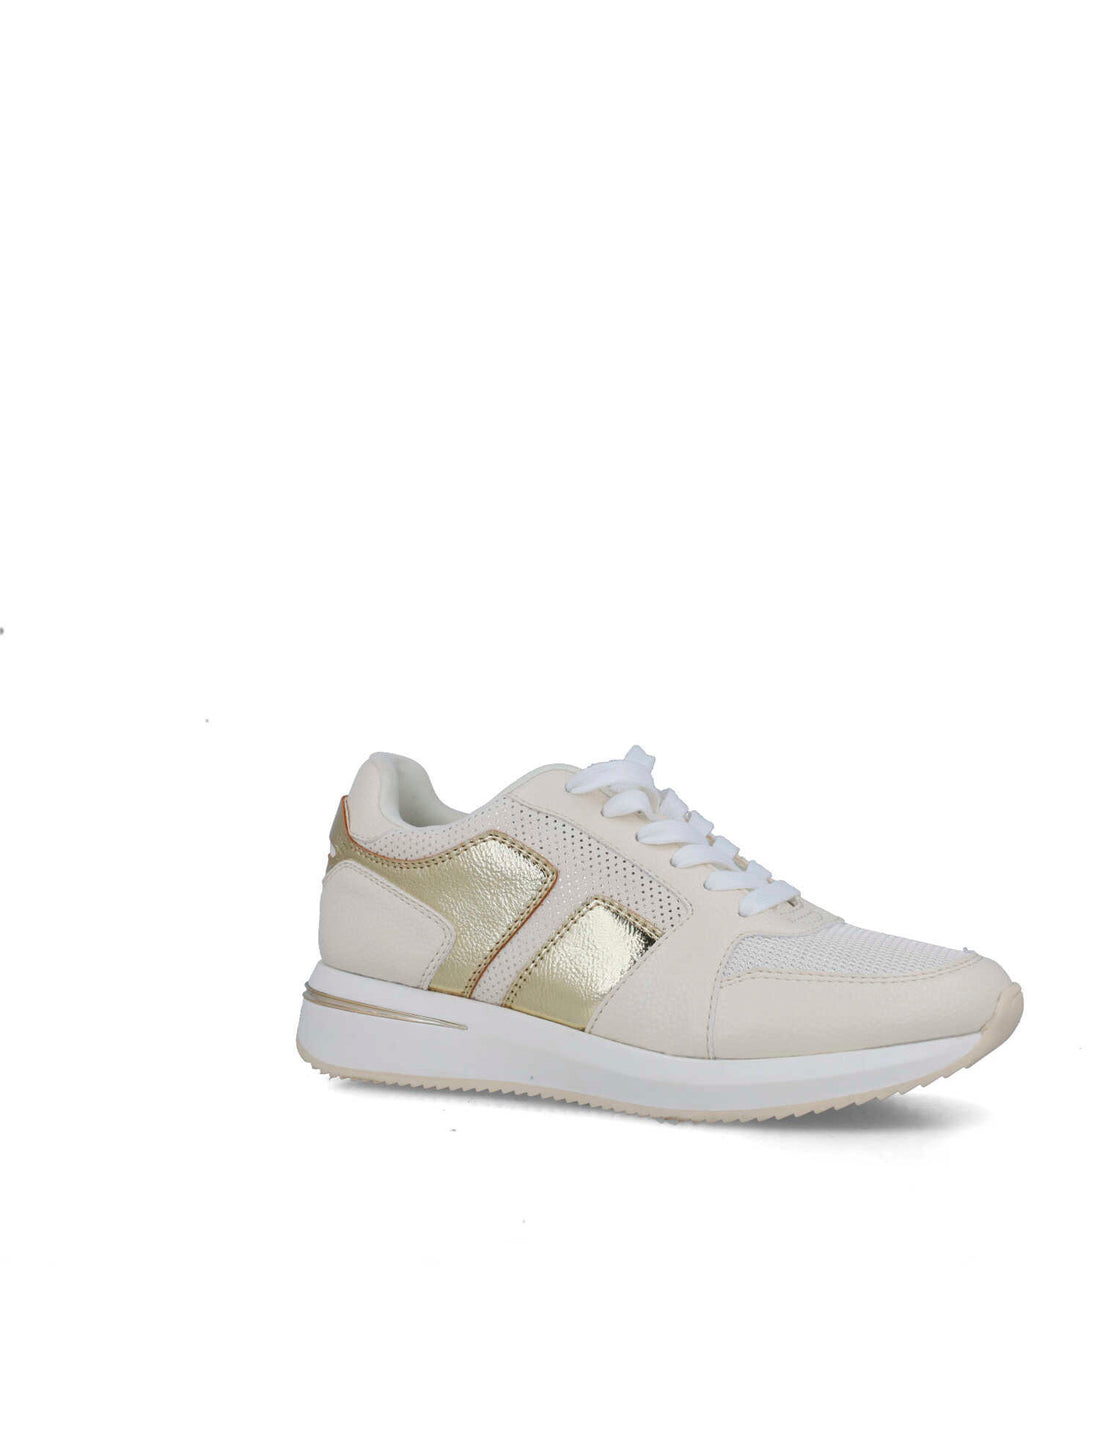 Beige Trainers With Gold Details_25611_00_02